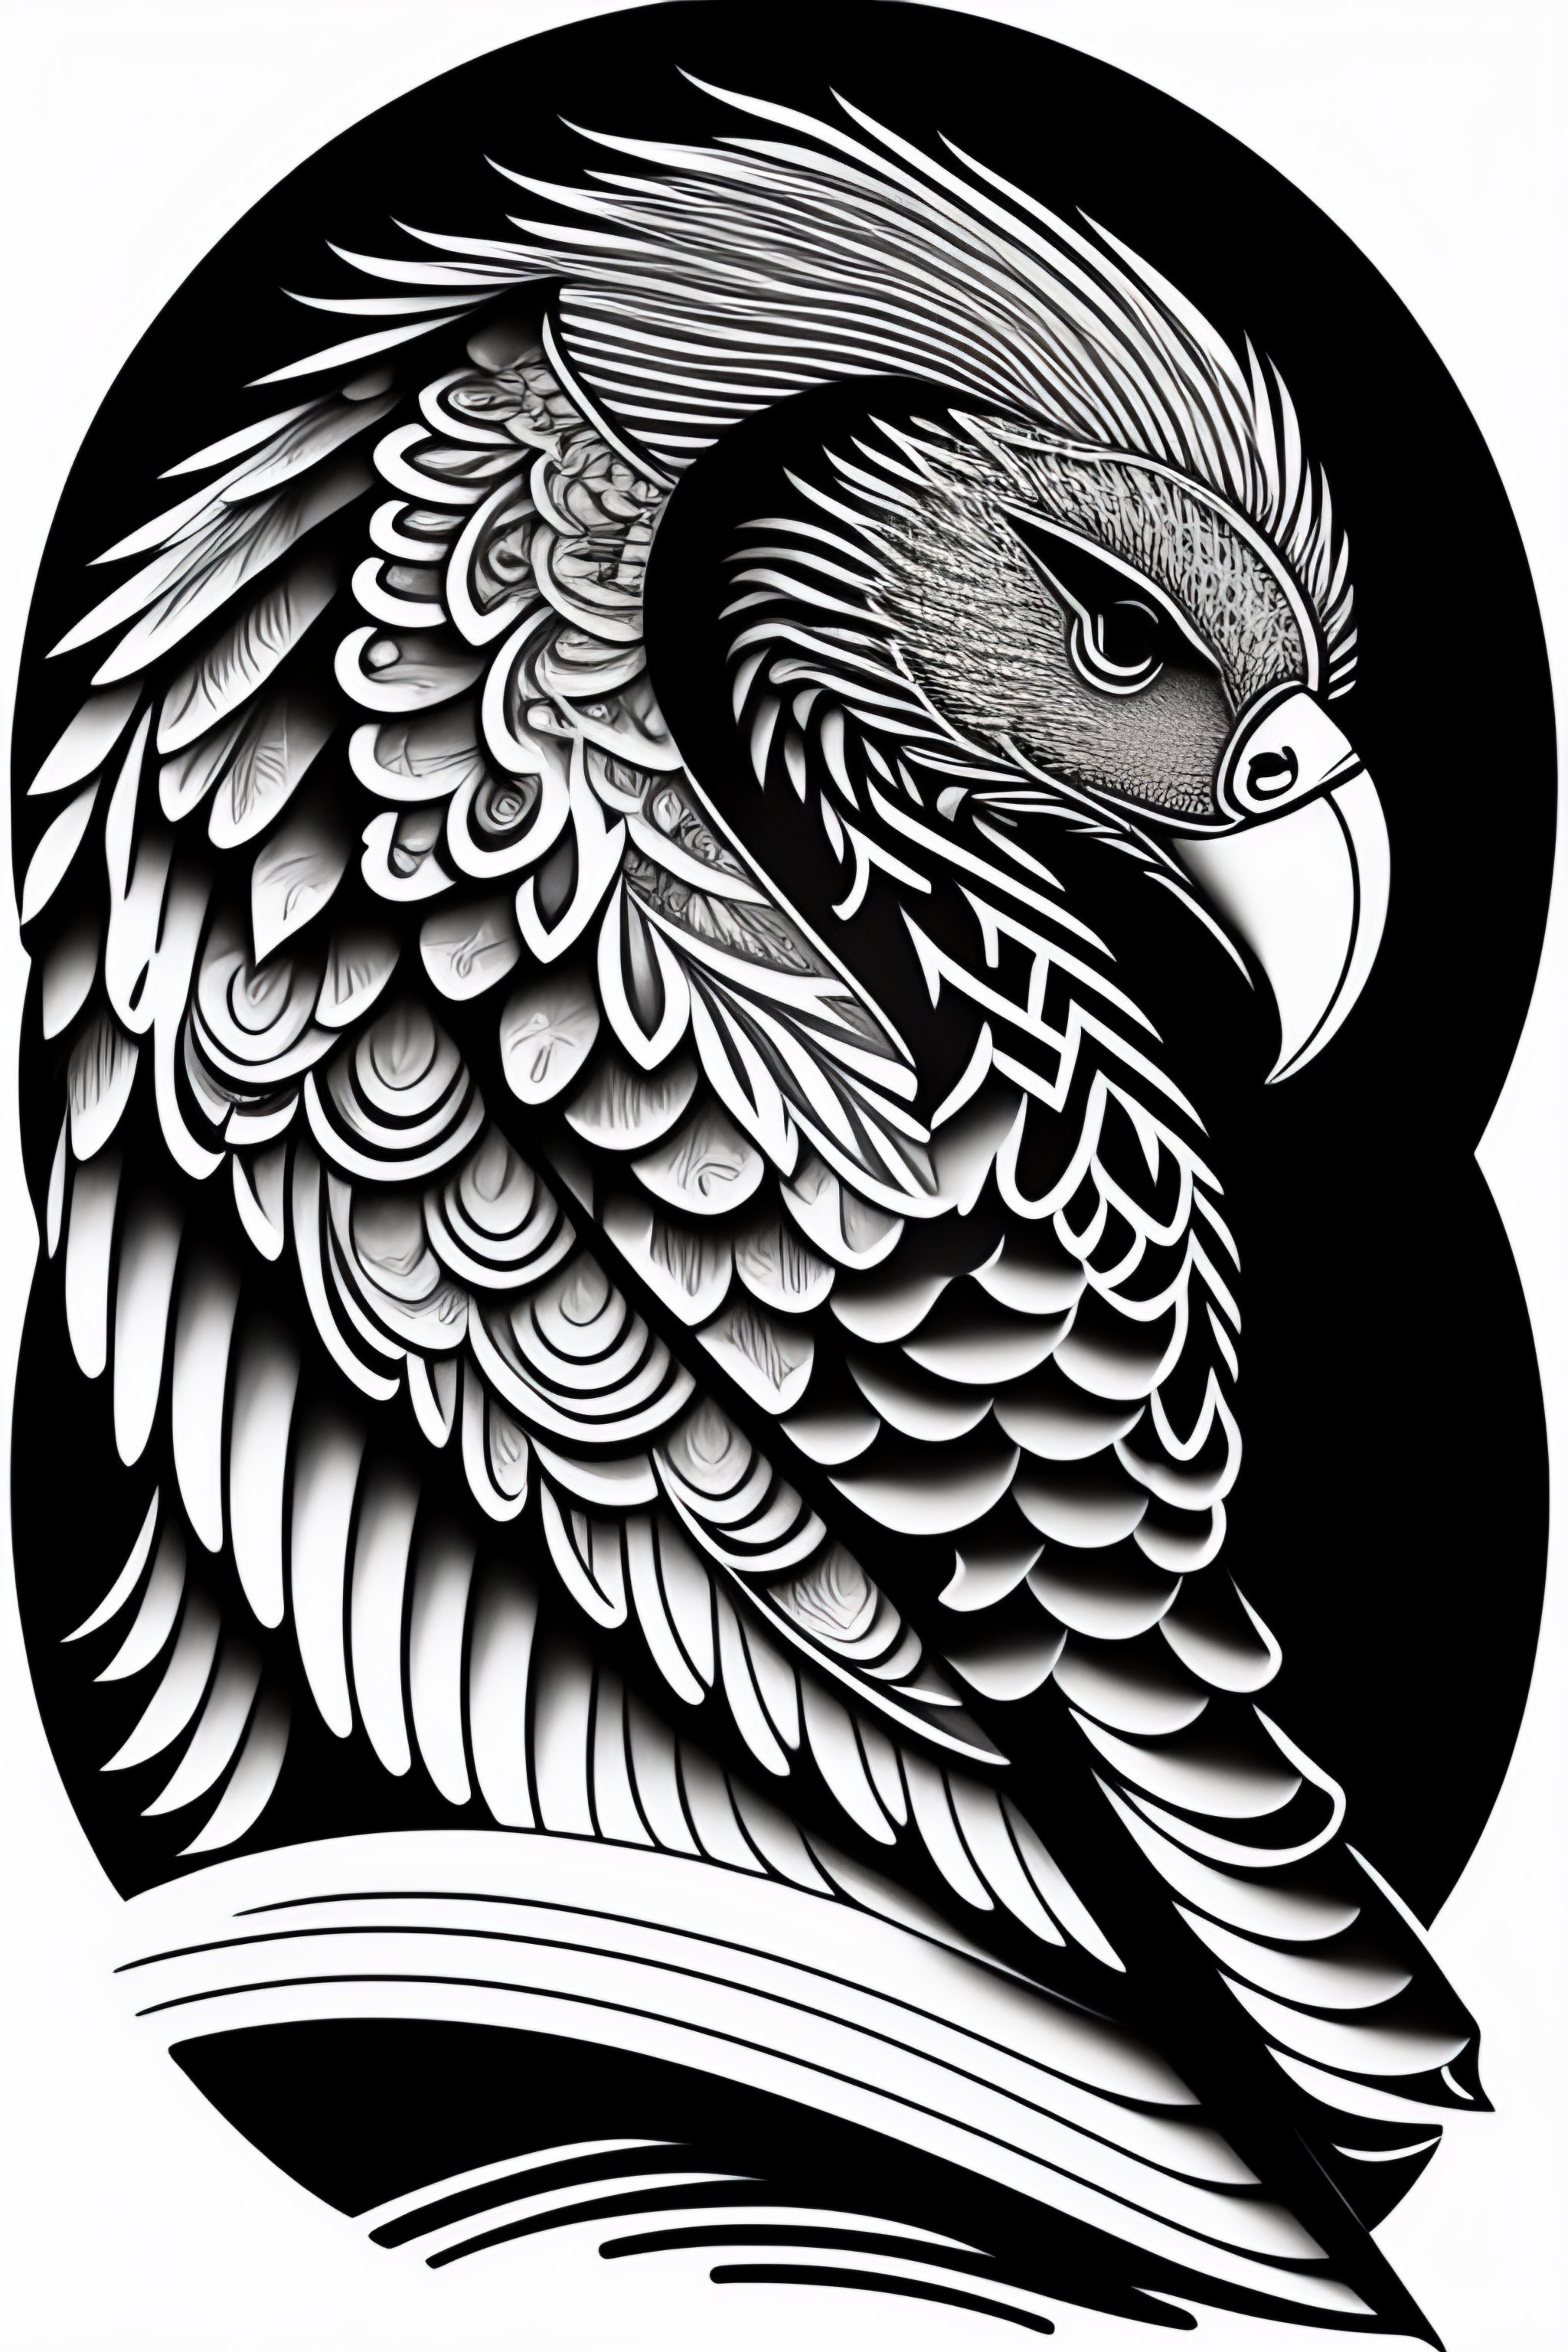 Lexica - Tattoo design, stencil, tattoo stencil, traditional, a world  famous tattoo of a geometric eagle, black and white, white background